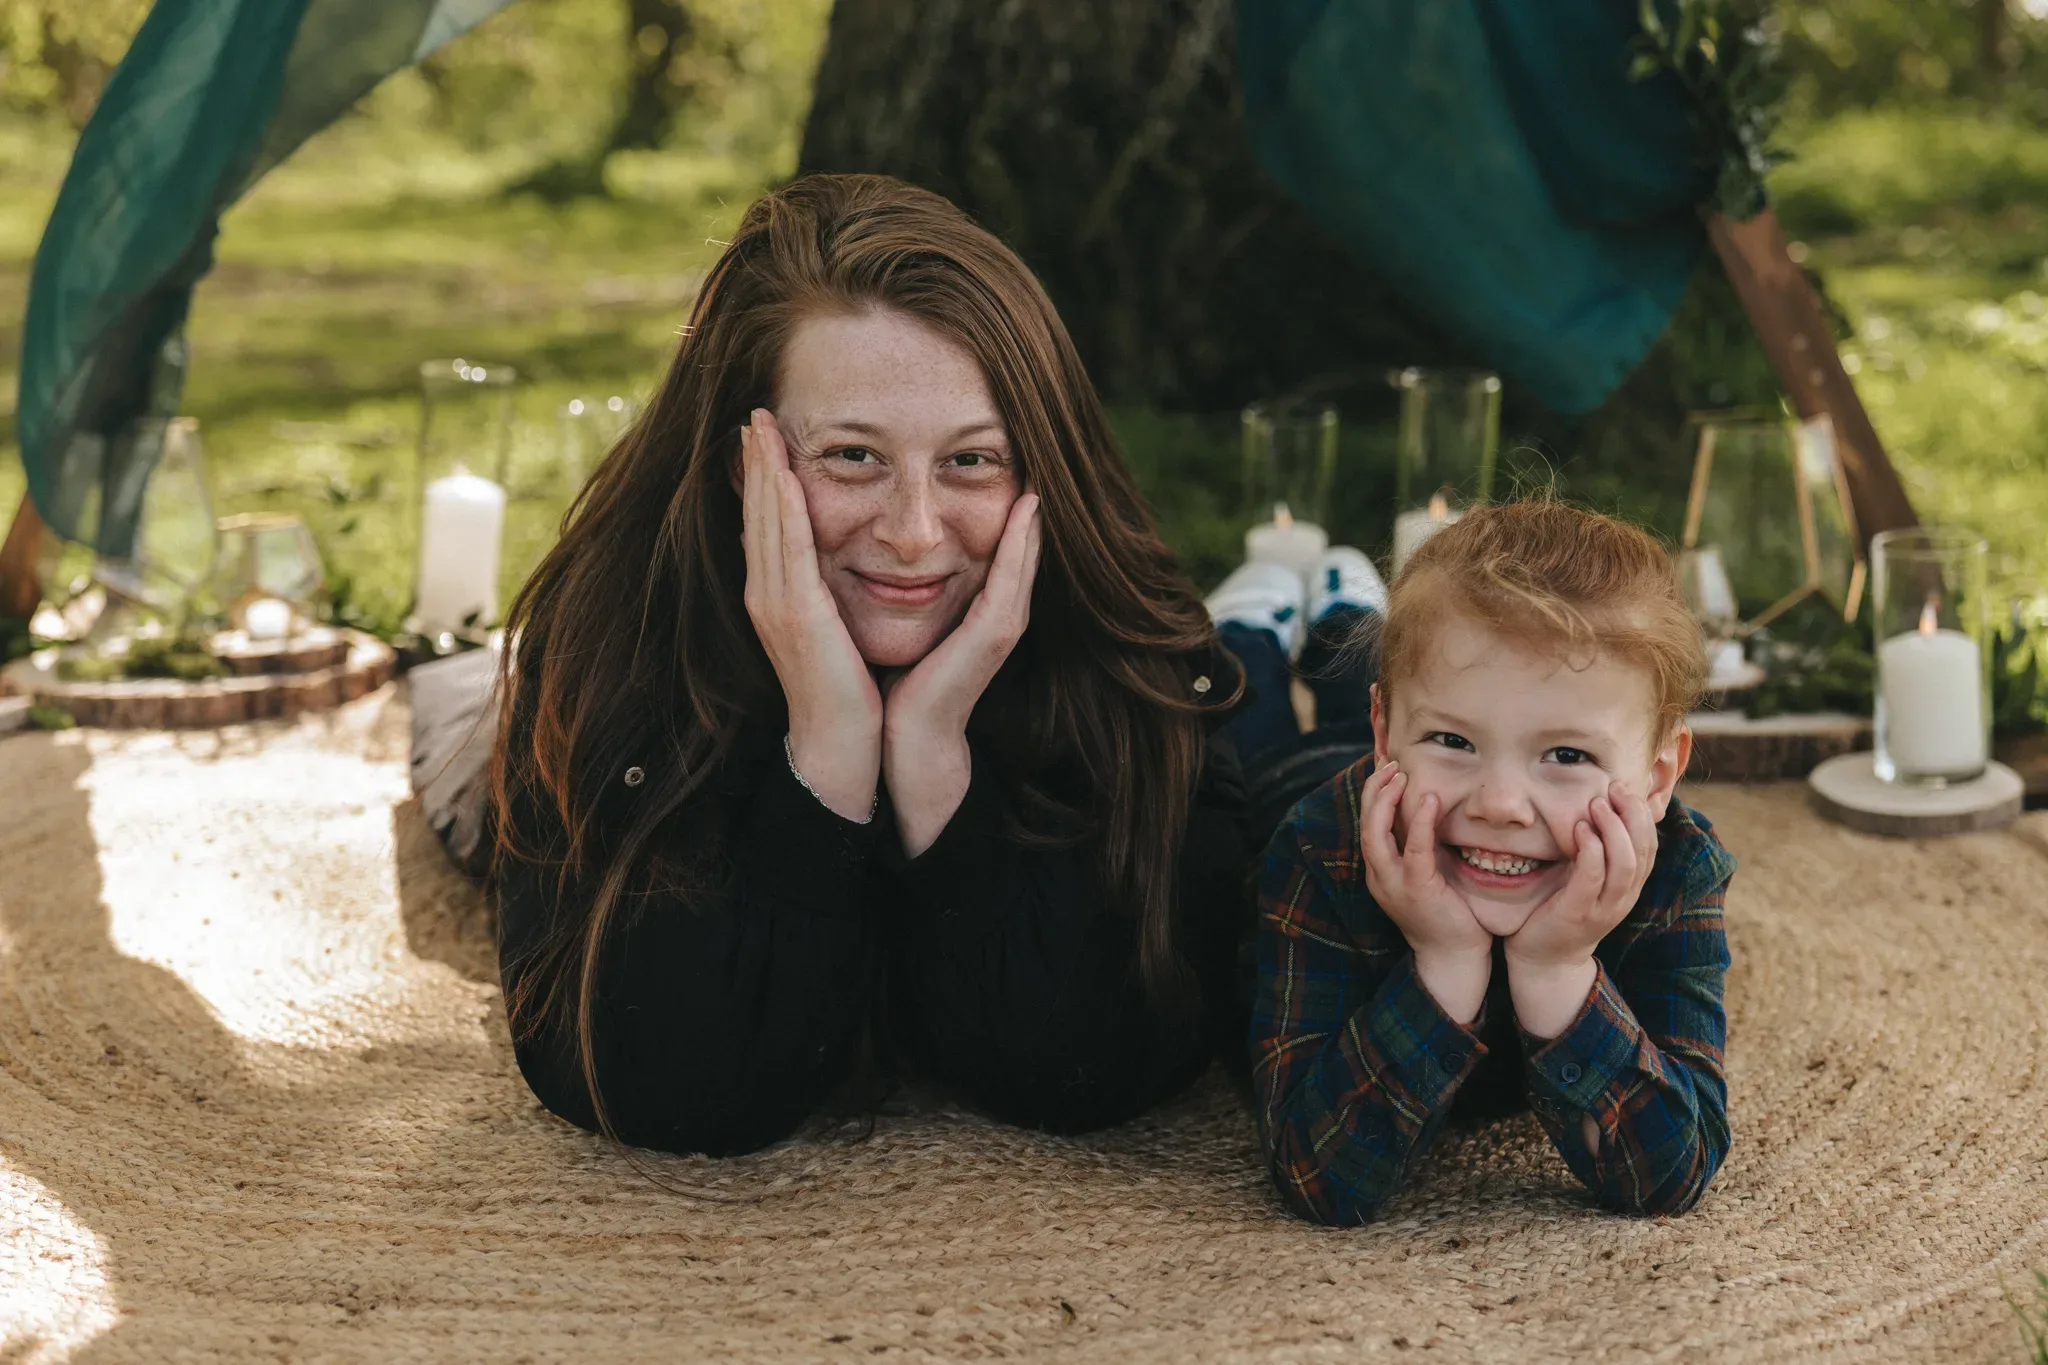 A woman and a young boy lie on their stomachs on a blanket, resting their cheeks on their hands and smiling at the camera, with a picnic setup and a tree draped with teal fabrics in the background.